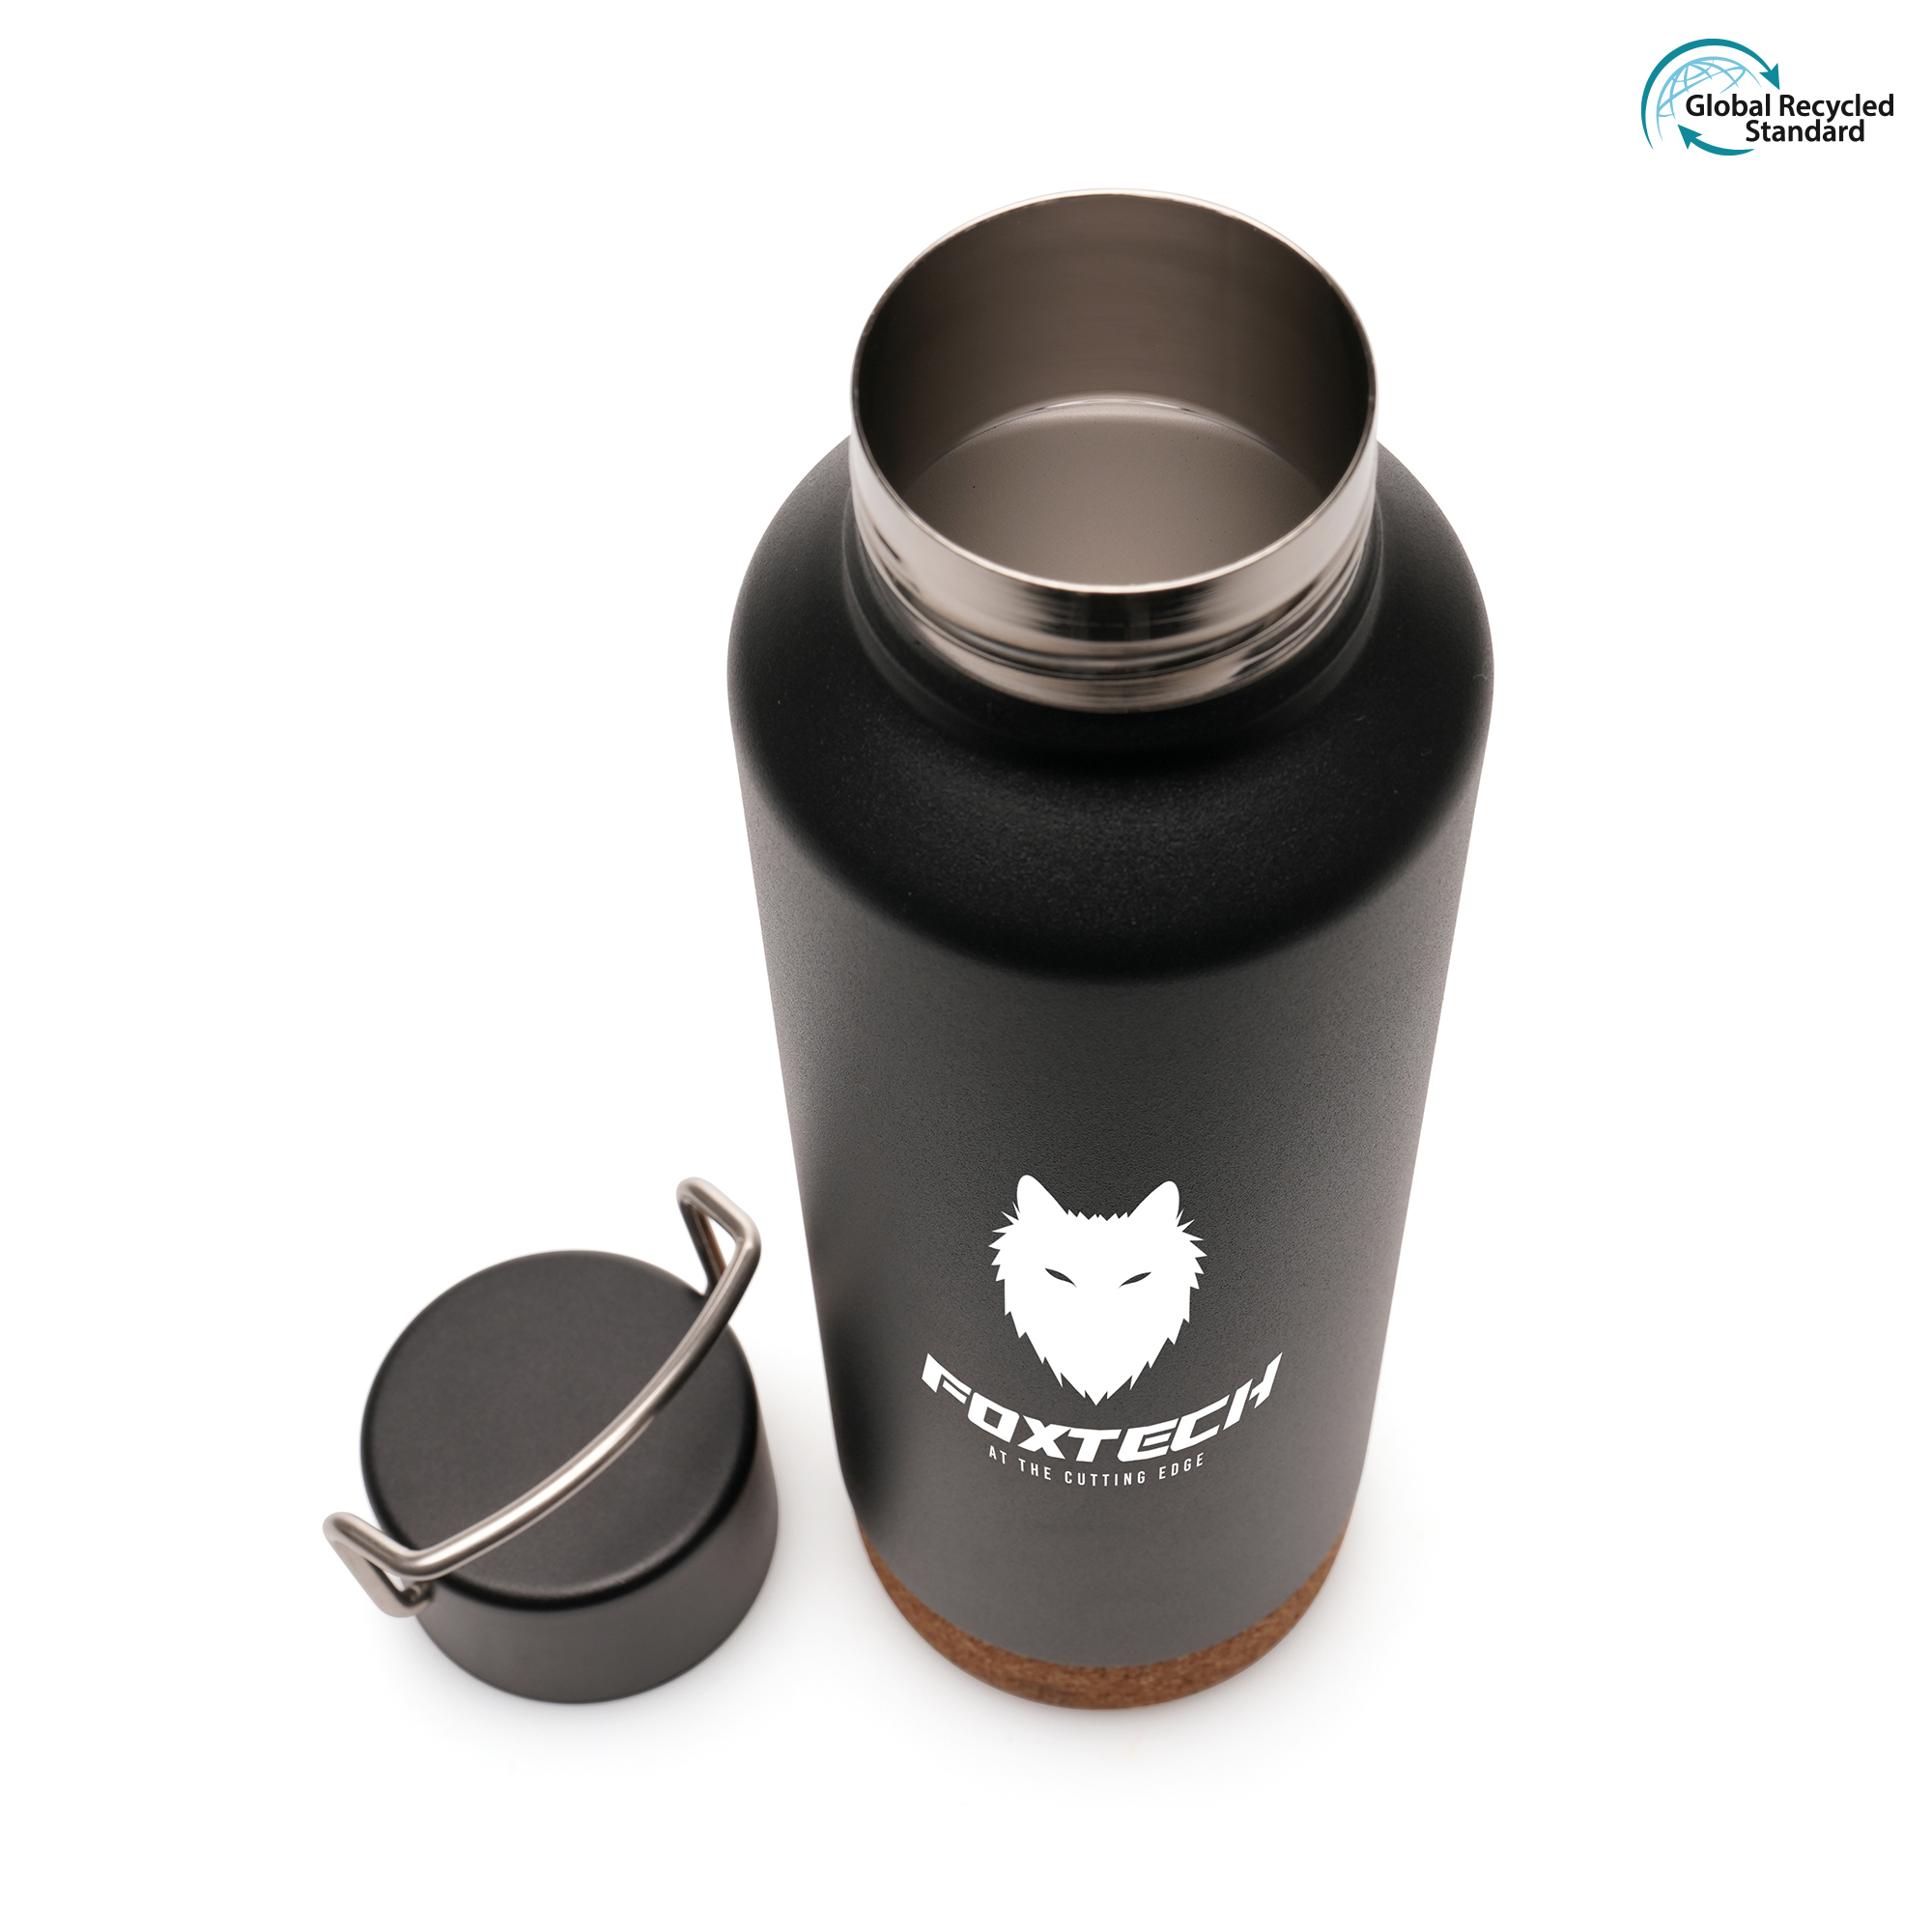 720ml double walled vacuum bottle with stainless steel body, built in handle to lid and cork base. BPA & PVC free.